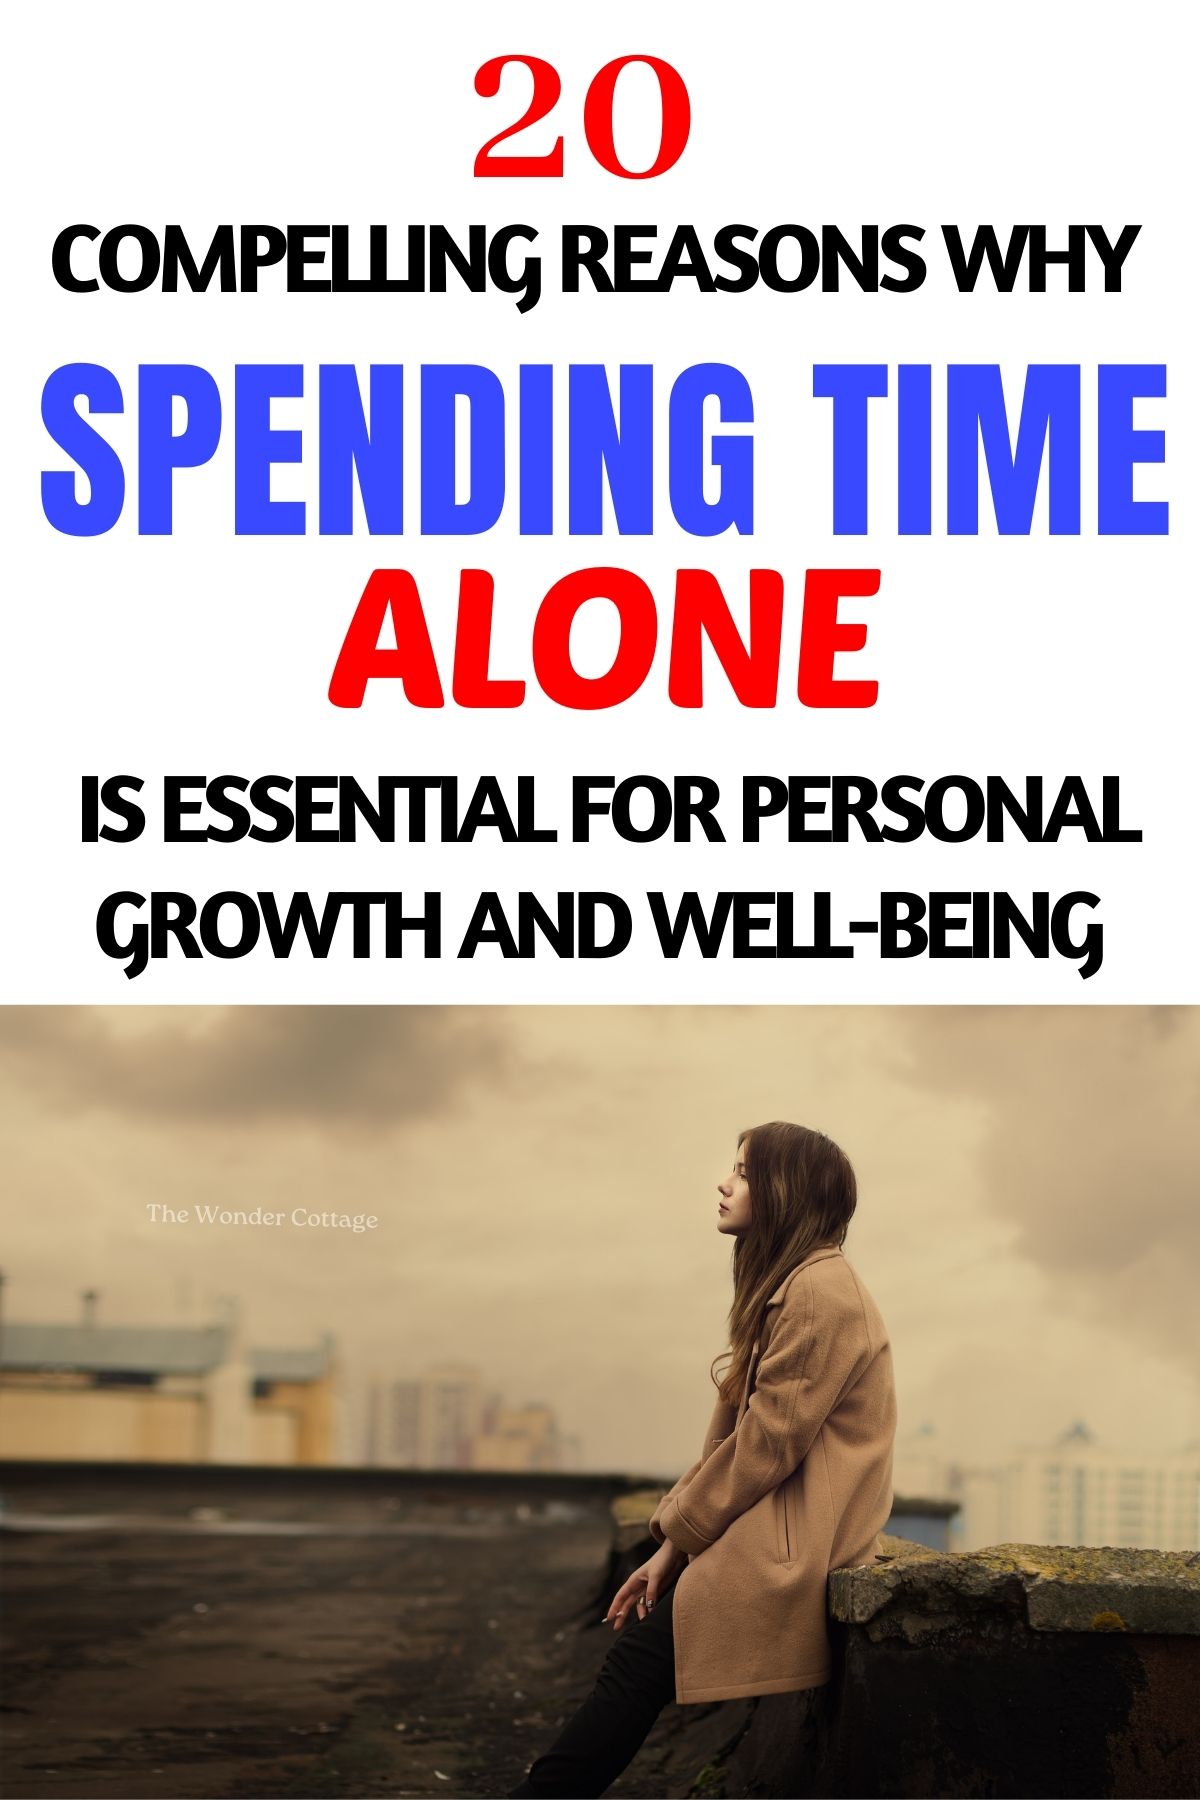 Compelling Reasons Why Spending Time Alone Is Essential For Personal Growth And Well-being